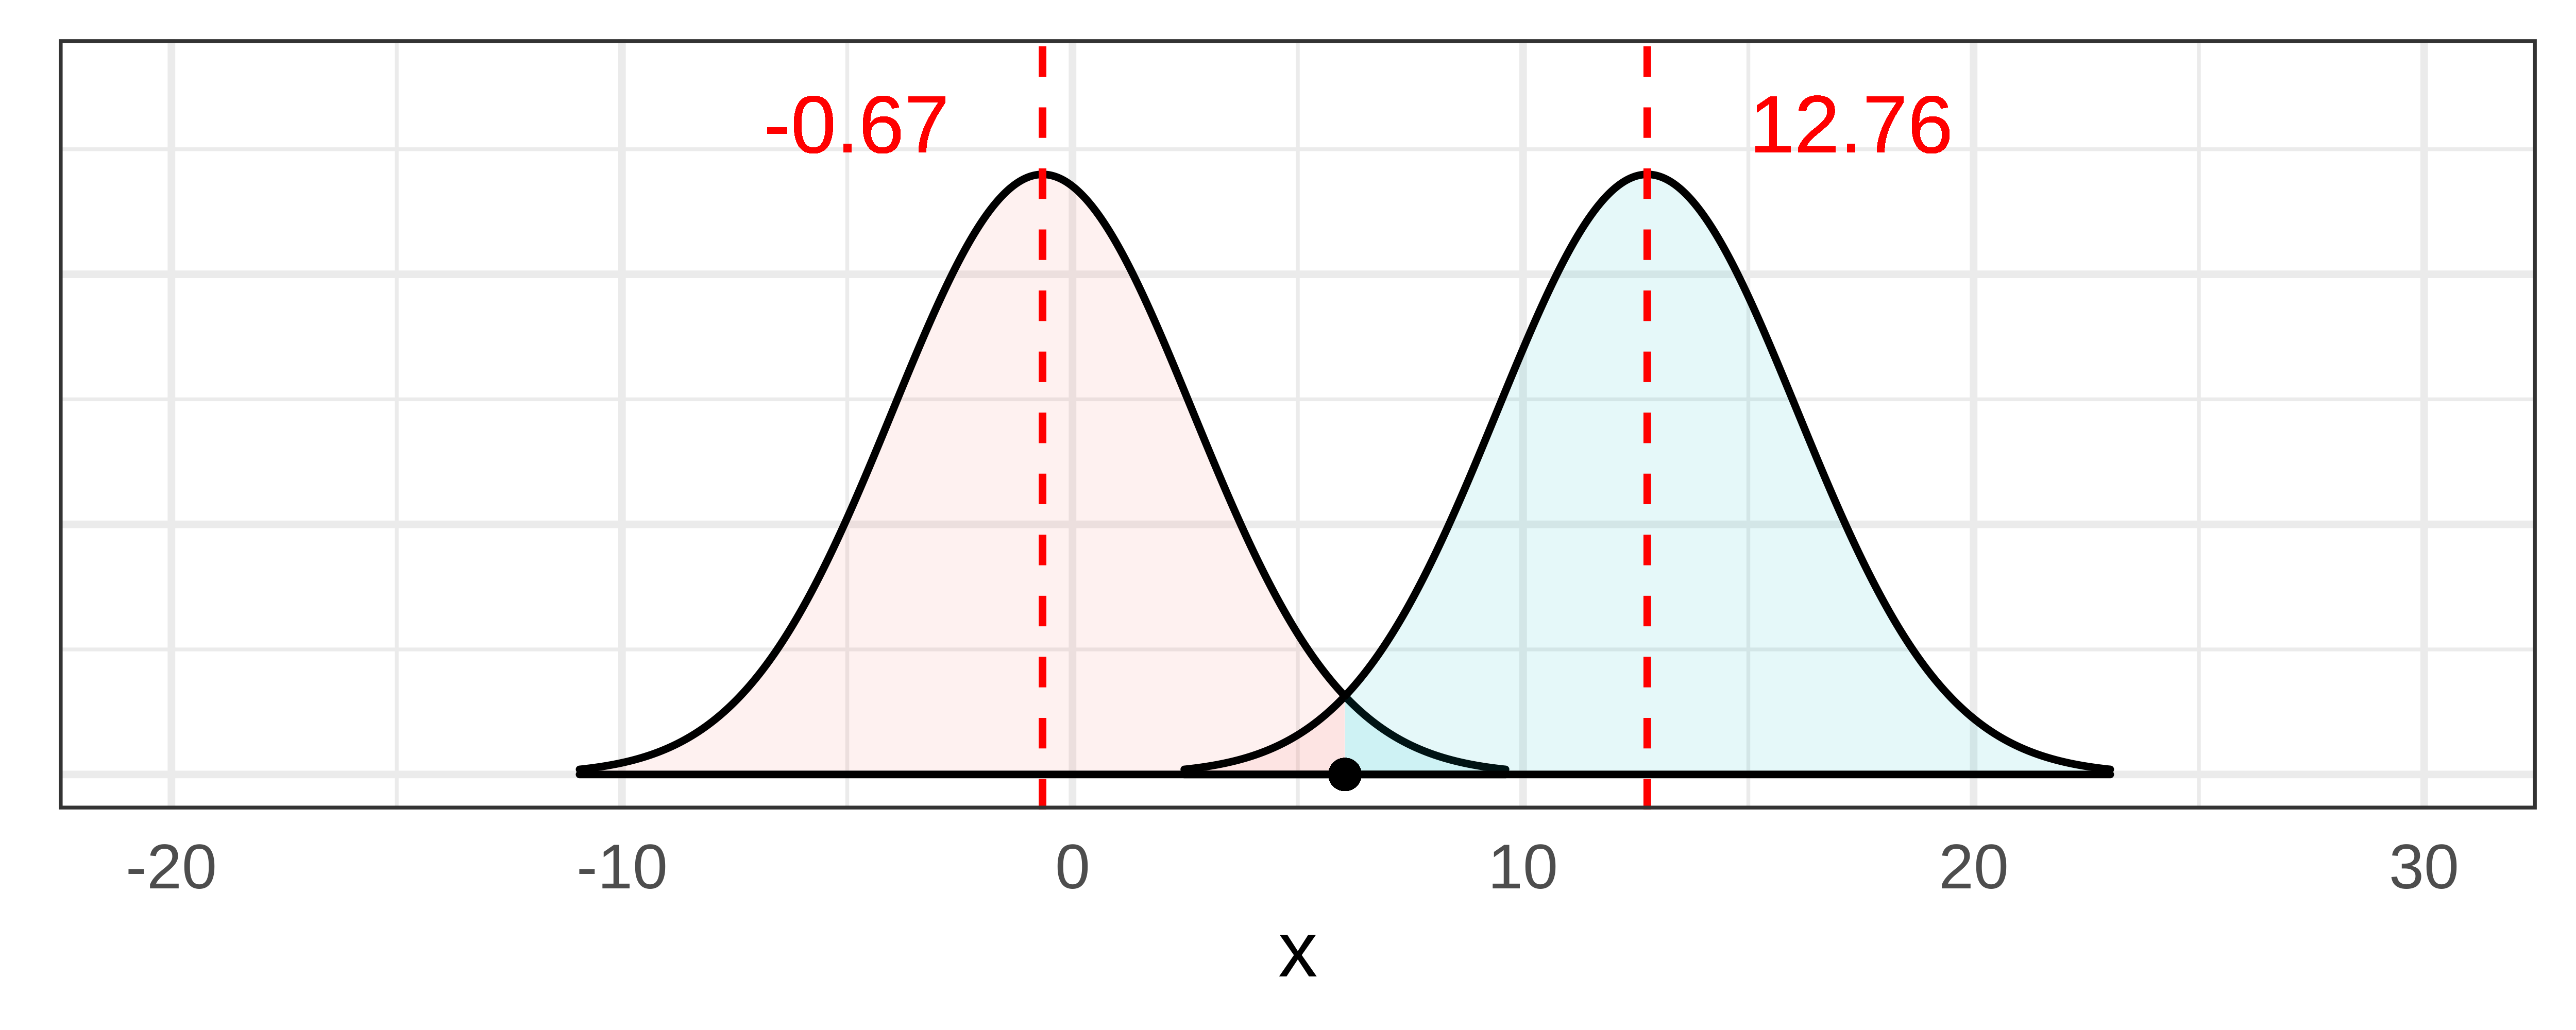 A histogram that depicts the lower bound sampling distribution, centered at negative 0.67, and the upper bound distribution, centered at 12.76. The sample b1 of 6.05 falls in the tails of the two distributions.